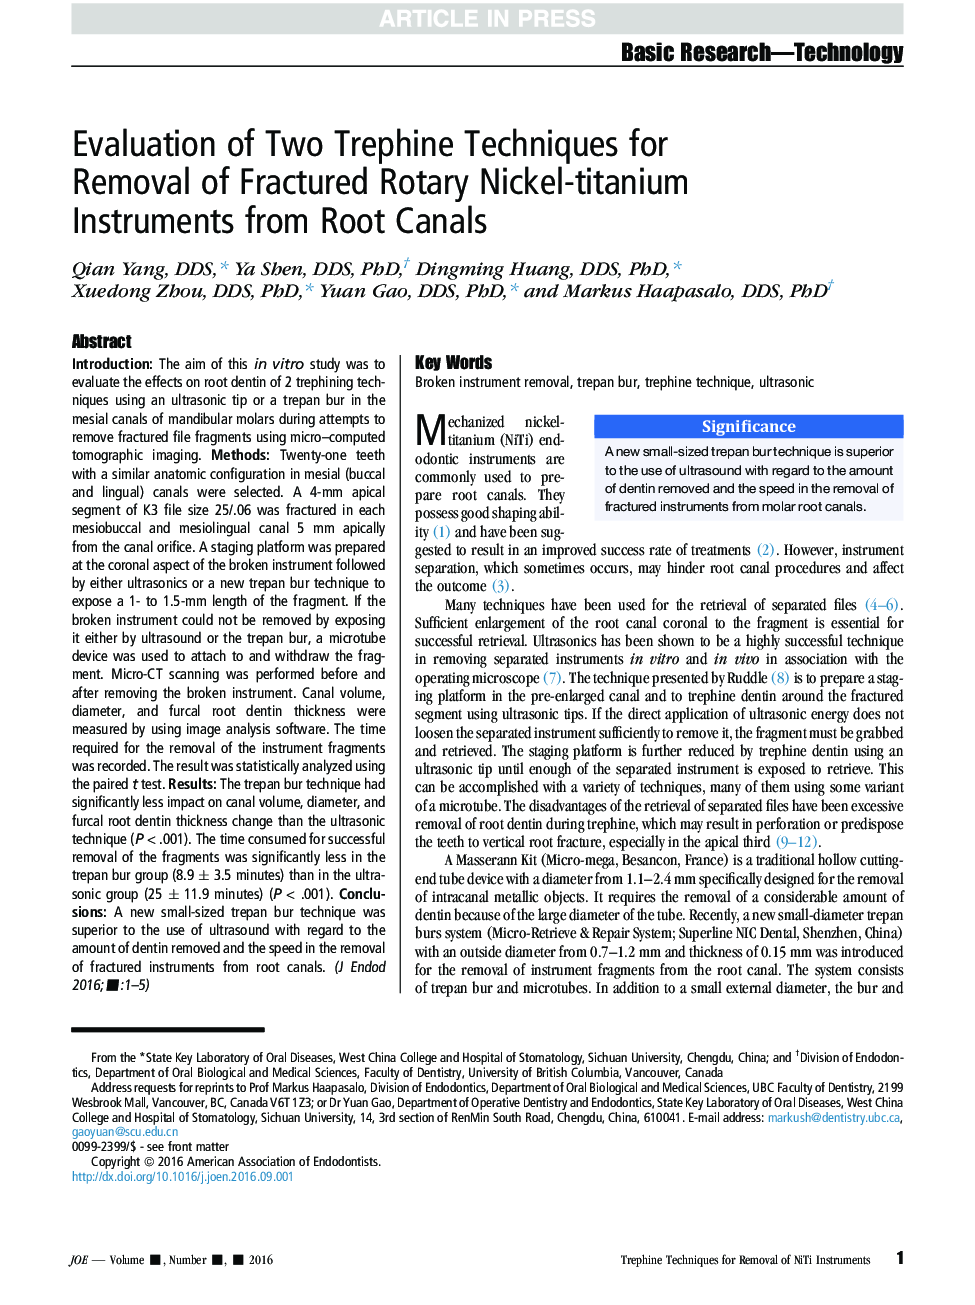 Evaluation of Two Trephine Techniques for Removal of Fractured Rotary Nickel-titanium Instruments from Root Canals